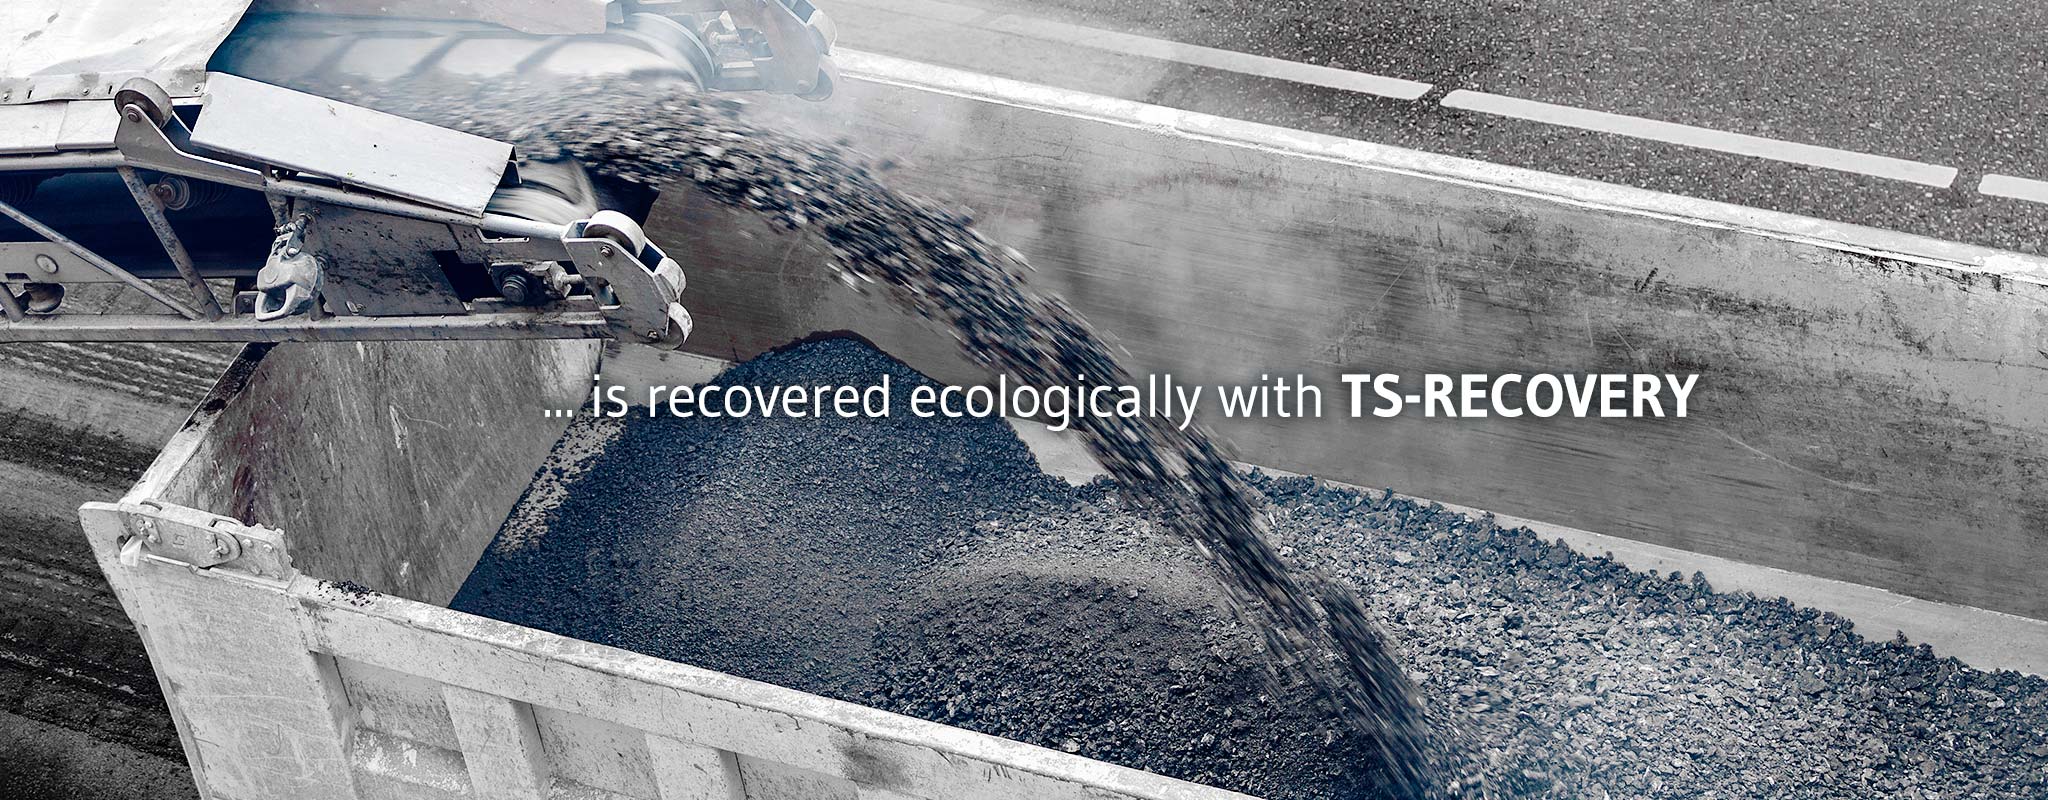 Tar contaminated road rubble recycling alternatives with TS-RECOVERY rx_sol_home-slide_F_ts_verwertung_EN_02b.jpg